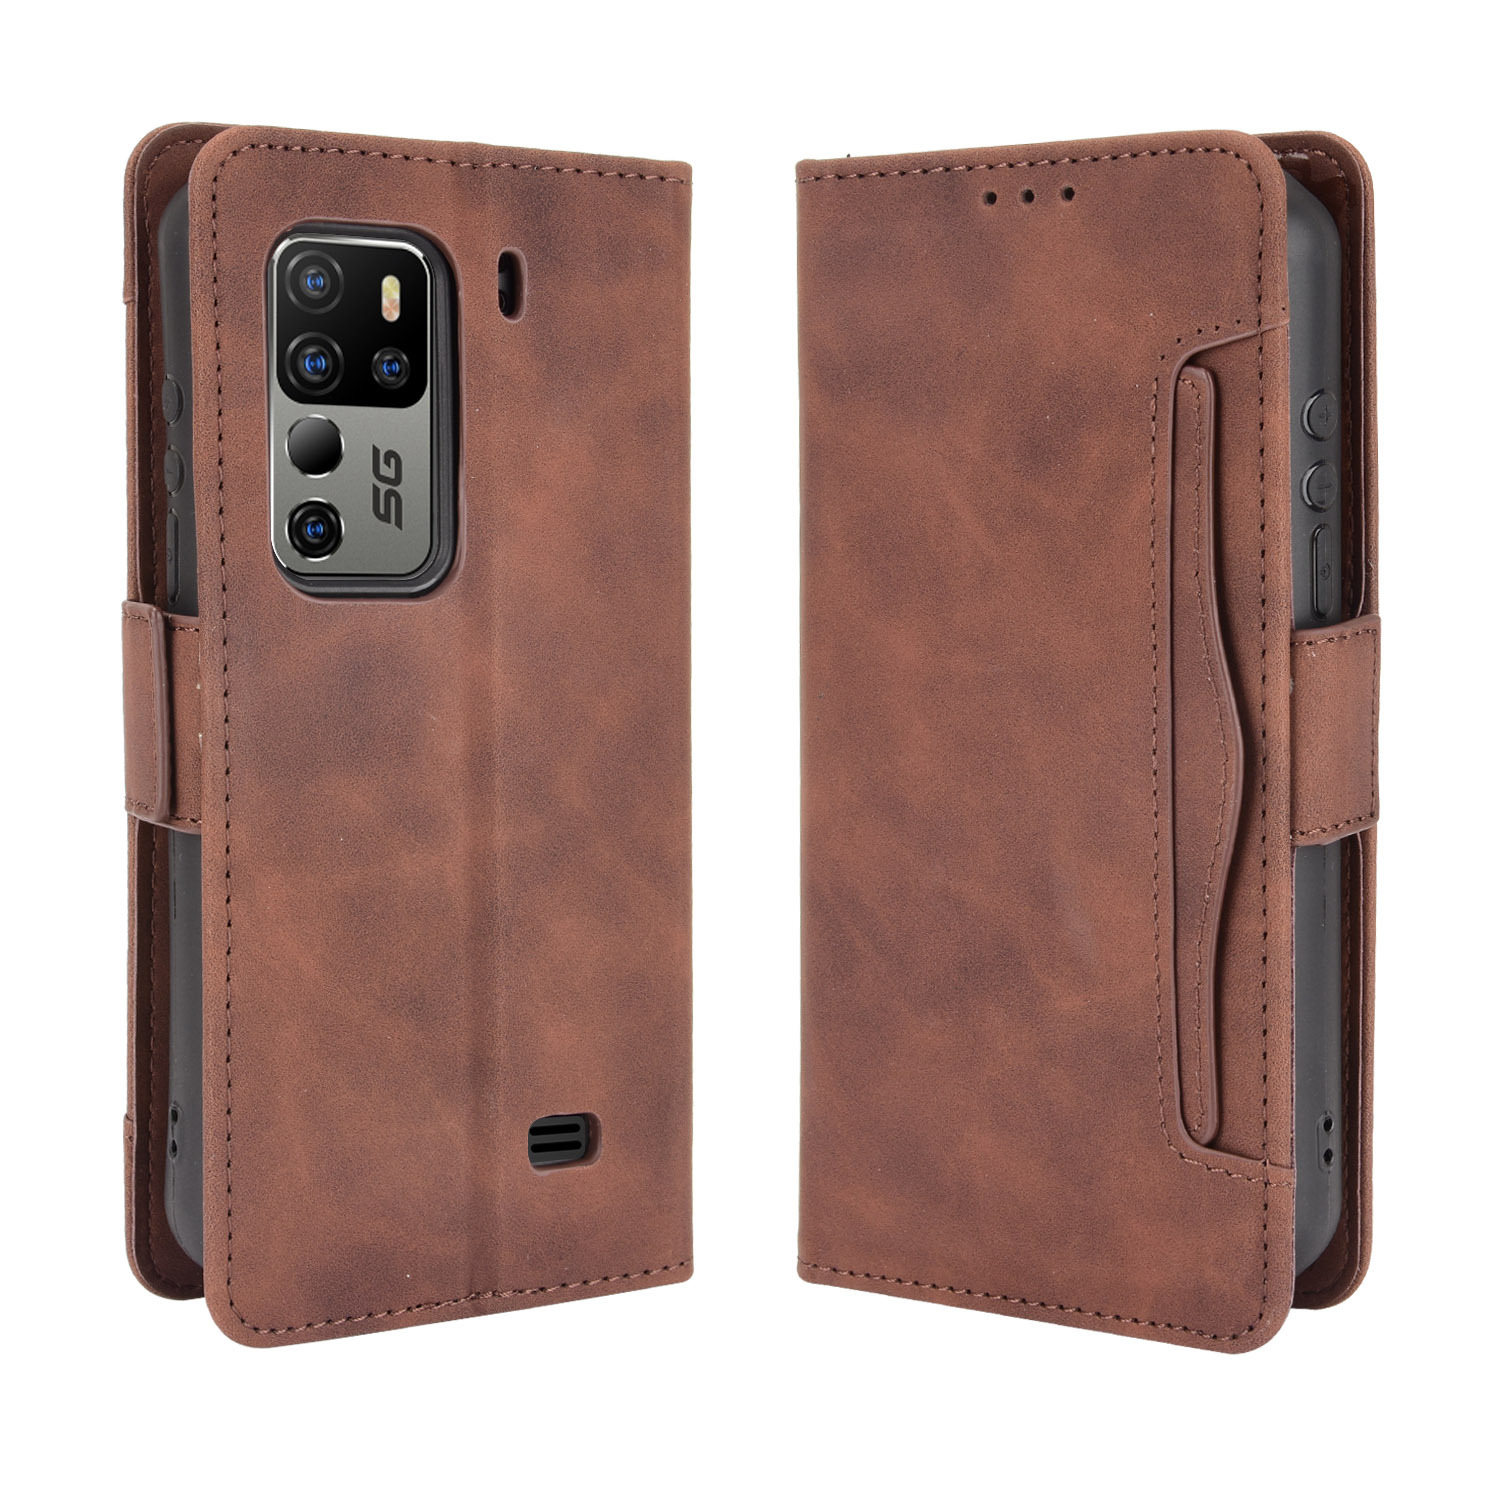 Bakeey-for-Ulefone-Armor-11-5G-Armor-11T-5G-Case-Magnetic-Flip-with-Multiple-Card-Slot-Wallet-Foldin-1915540-5